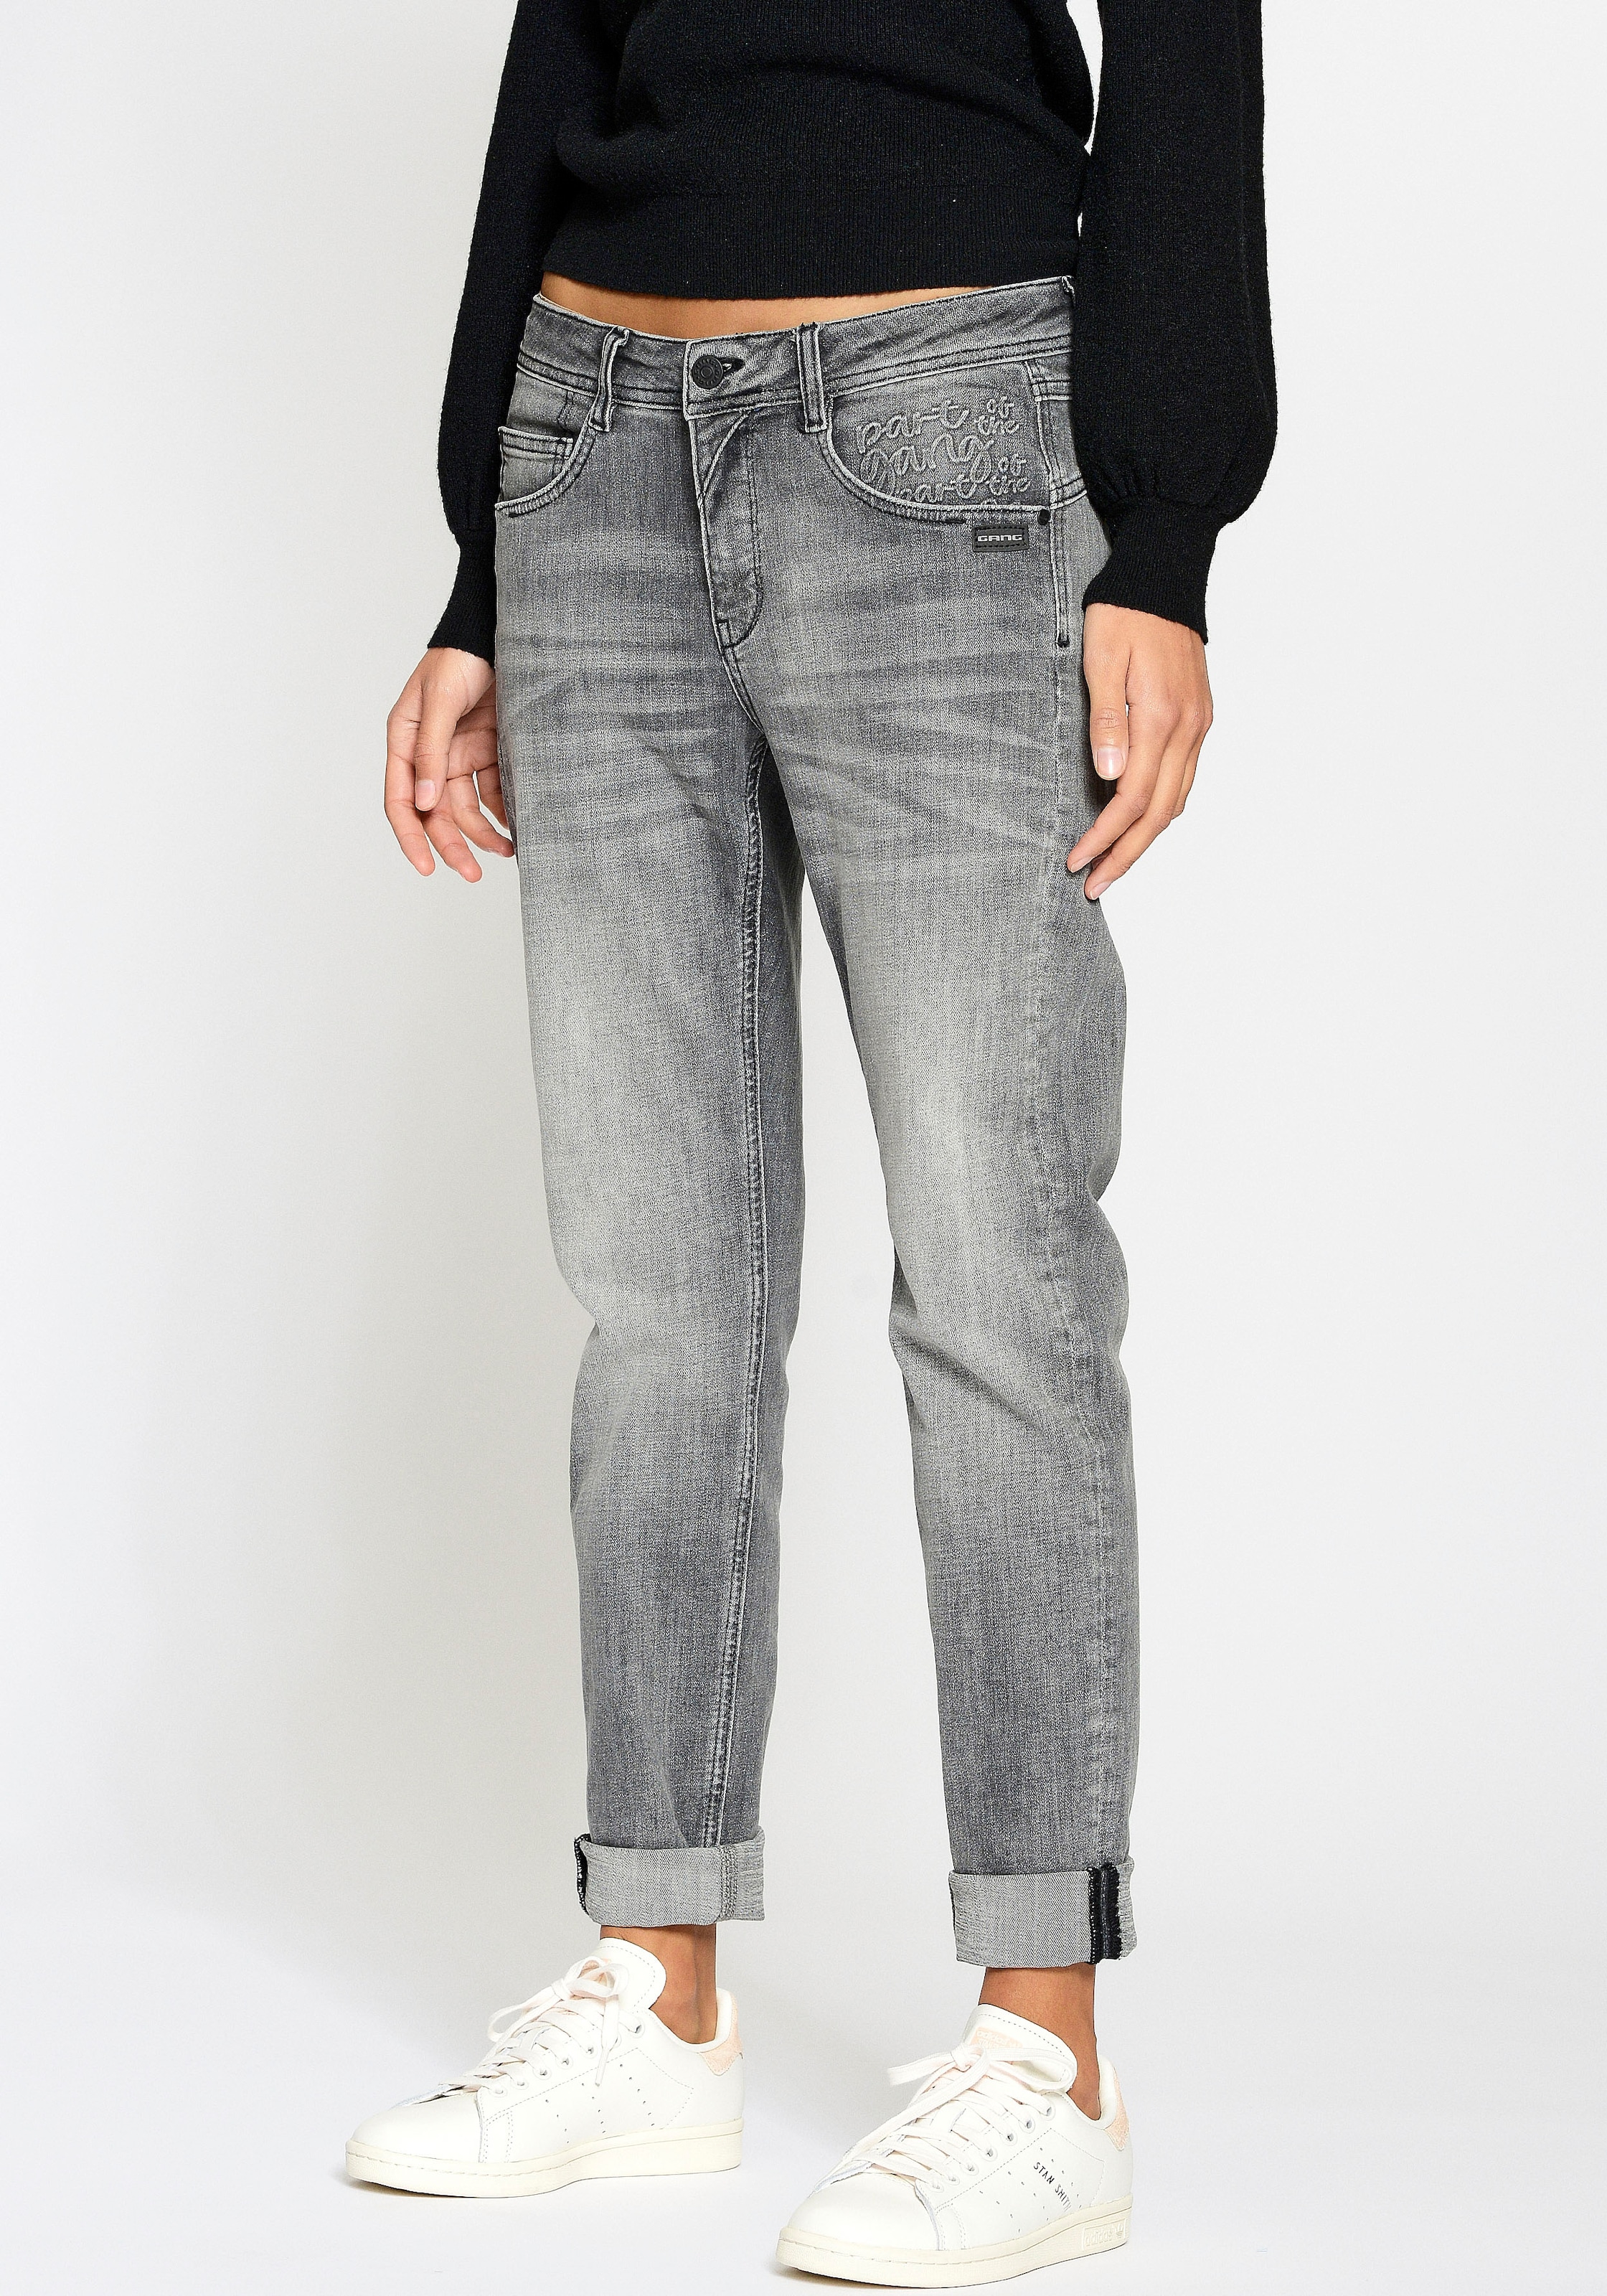 Shop Used-Effekten Online mit Relaxed »94Amelie GANG im Fit«, Relax-fit-Jeans OTTO